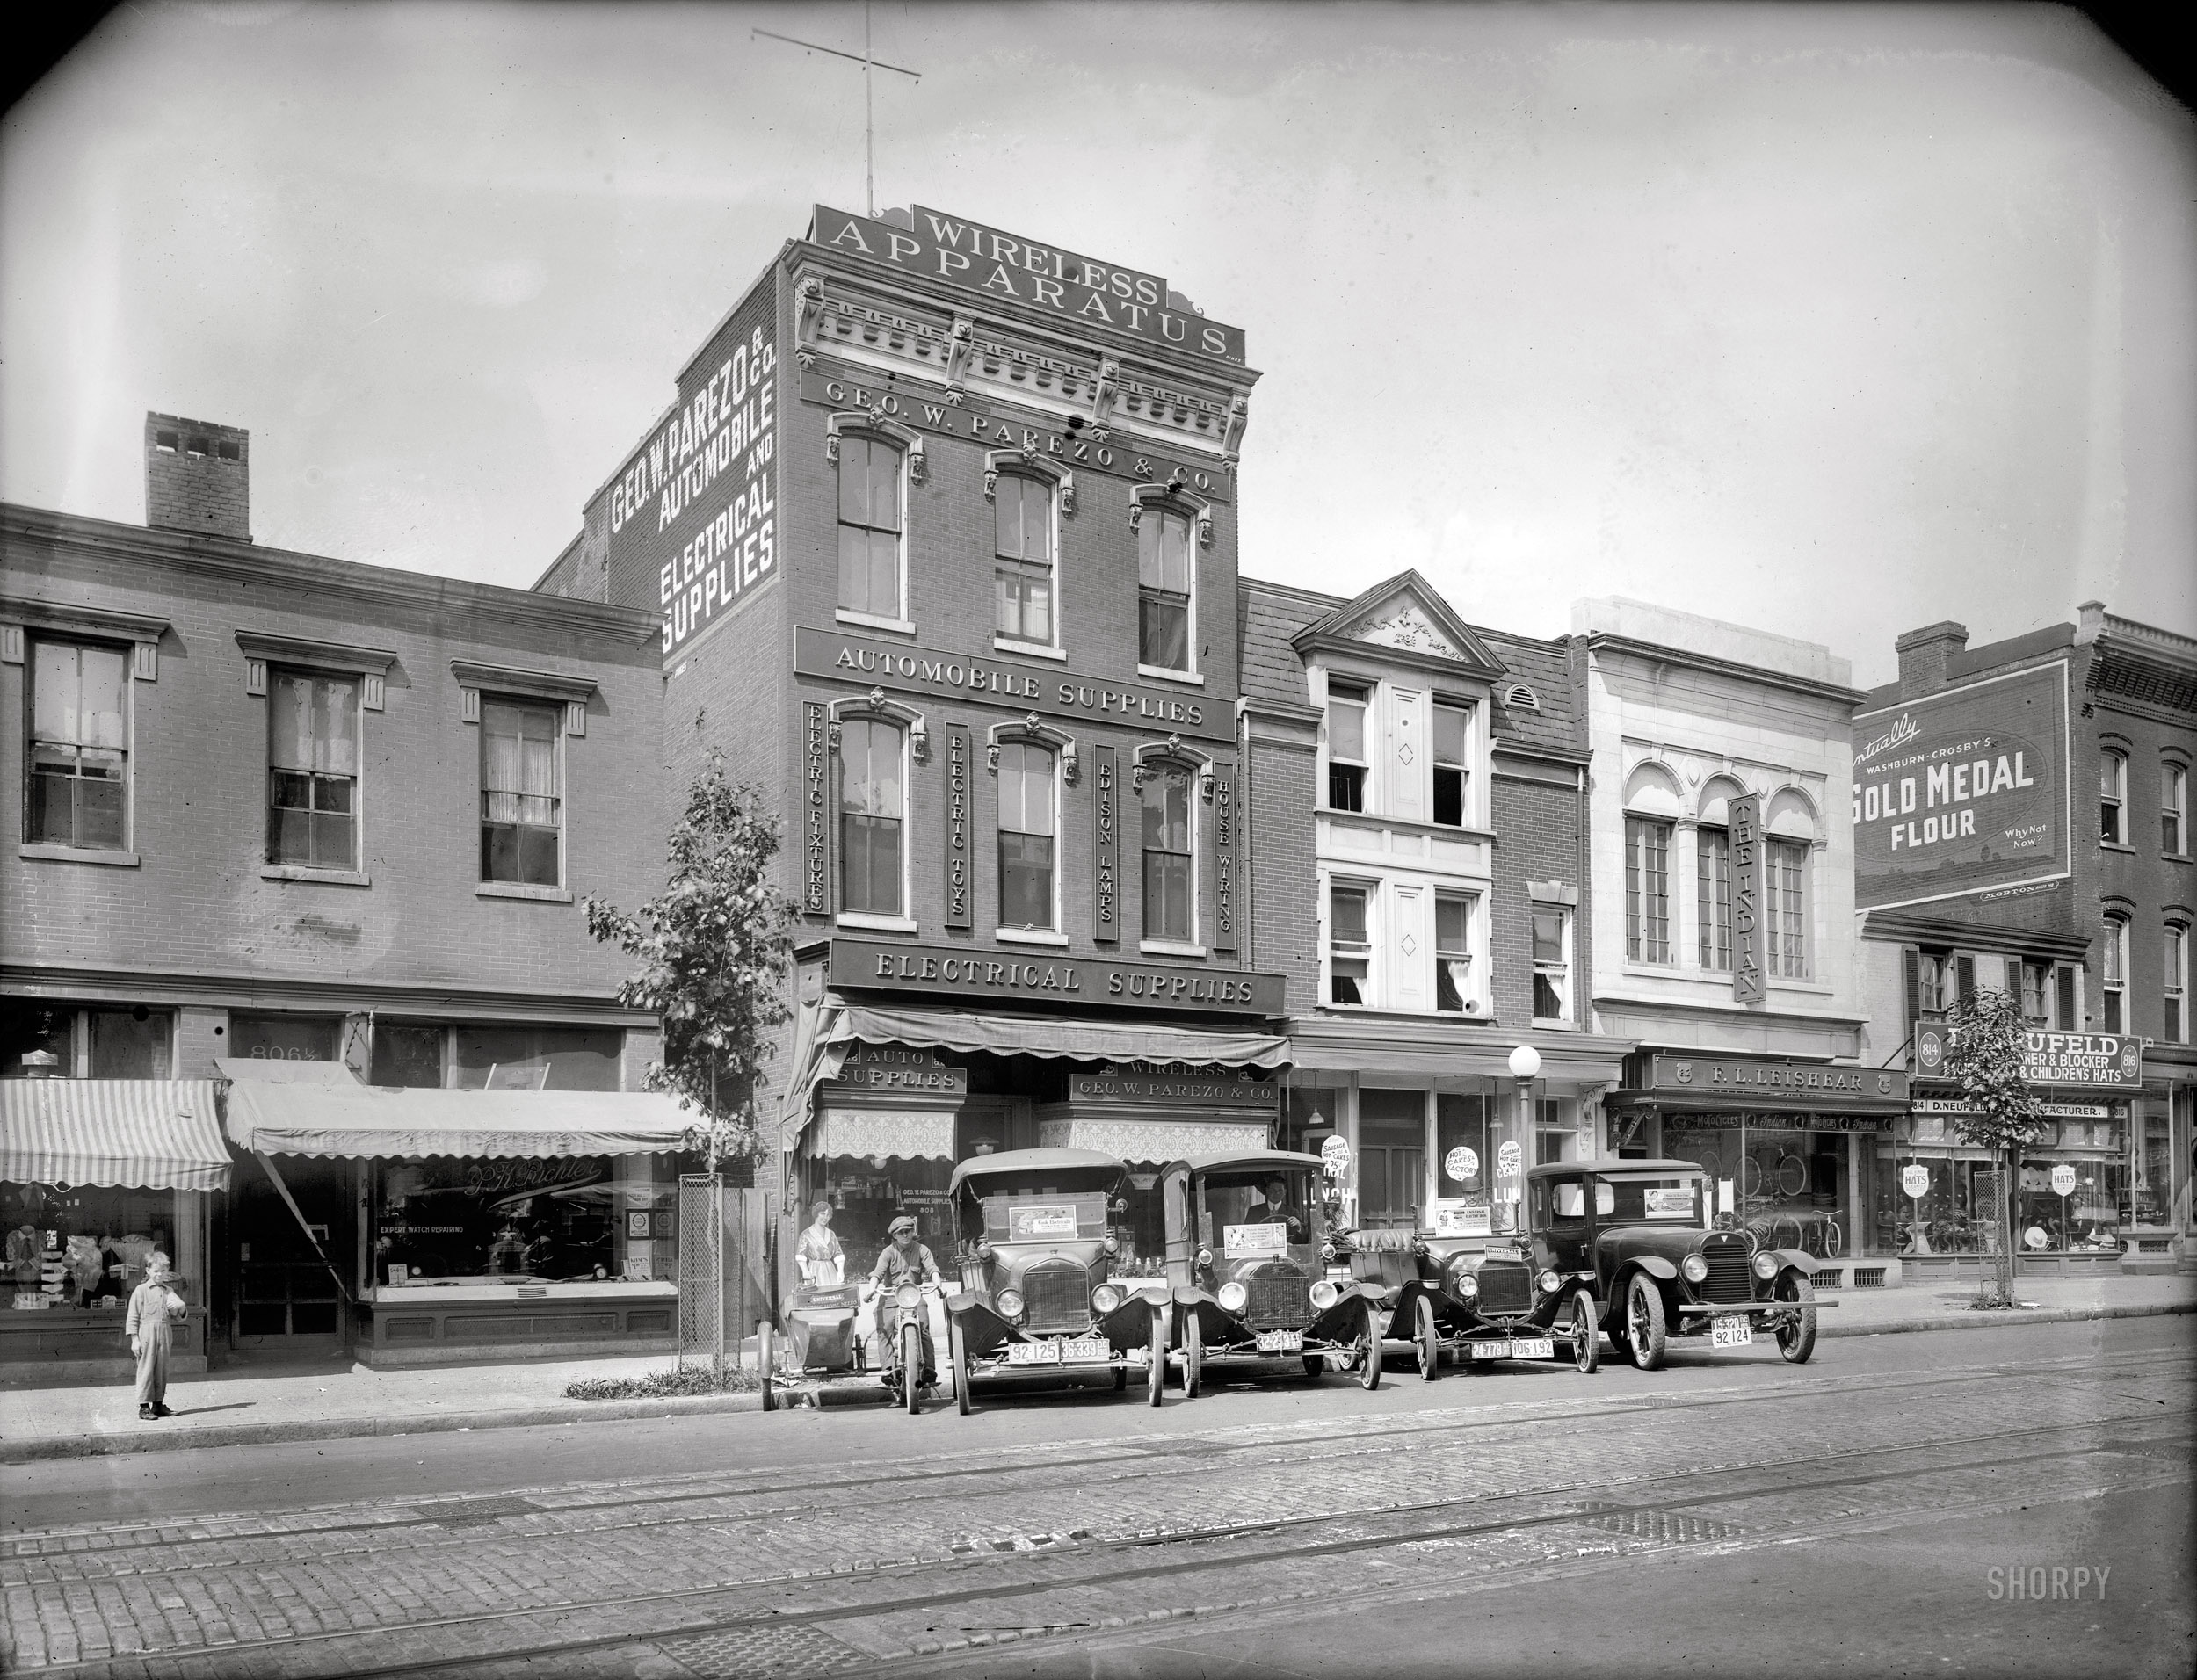 Washington, D.C., circa 1919. "George Parezo & Co., Ninth Street N.W." An electrical appliance store in the early years of that retail category (top sellers included irons, coffeepots, vacuums, table lamps and toasters), on the eve of the emergence of a new a mass communications medium. "Wireless" transmissions, at first mostly marine and military telegraphy, now included civilian audio broadcasts heard on crystal-set headphones. Before long loudspeakers connected to vacuum tube receivers entered the mainstream, and "radio" was born. National Photo Company Collection glass negative. View full size.